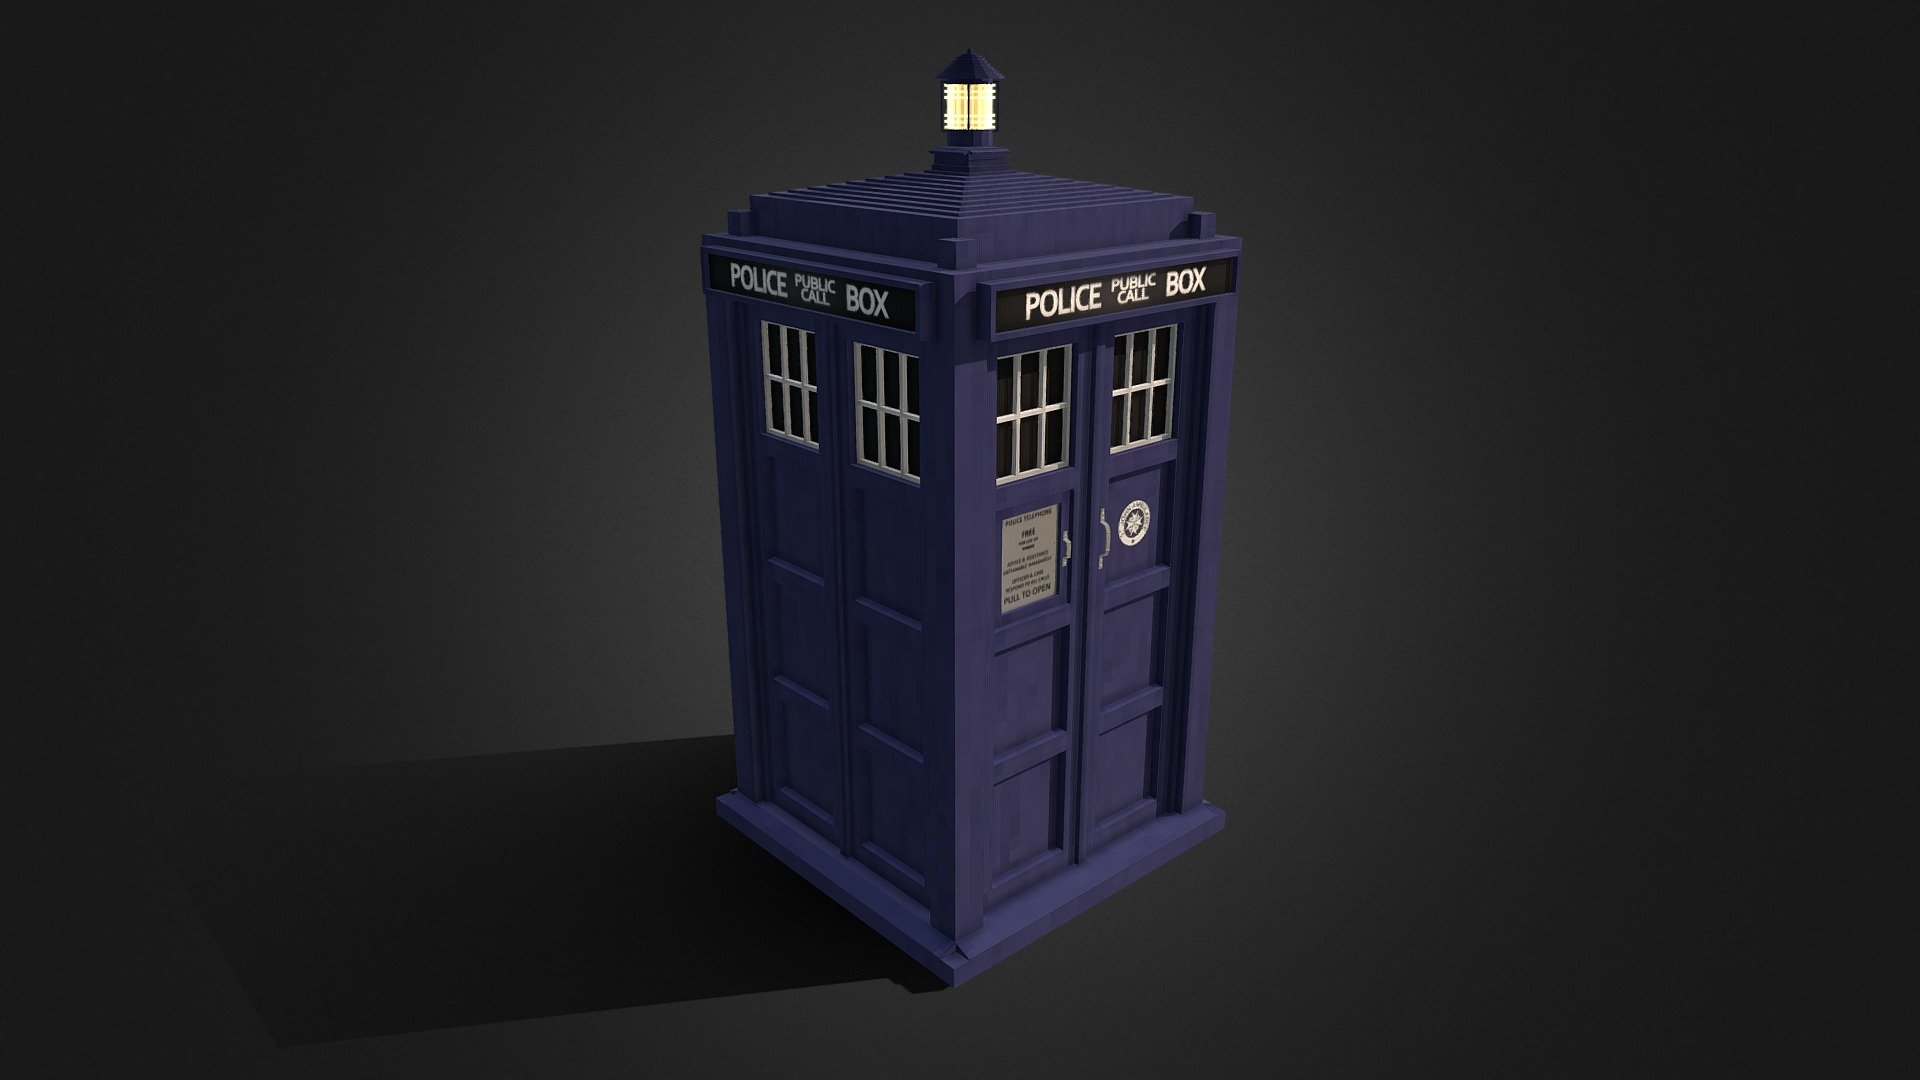 The famous time machine, the Tardis from the Dr Who series.
Made in Blockbench - The Tardis (Minecraft Model) - 3D model by chabArt (@chabinho) 3d model